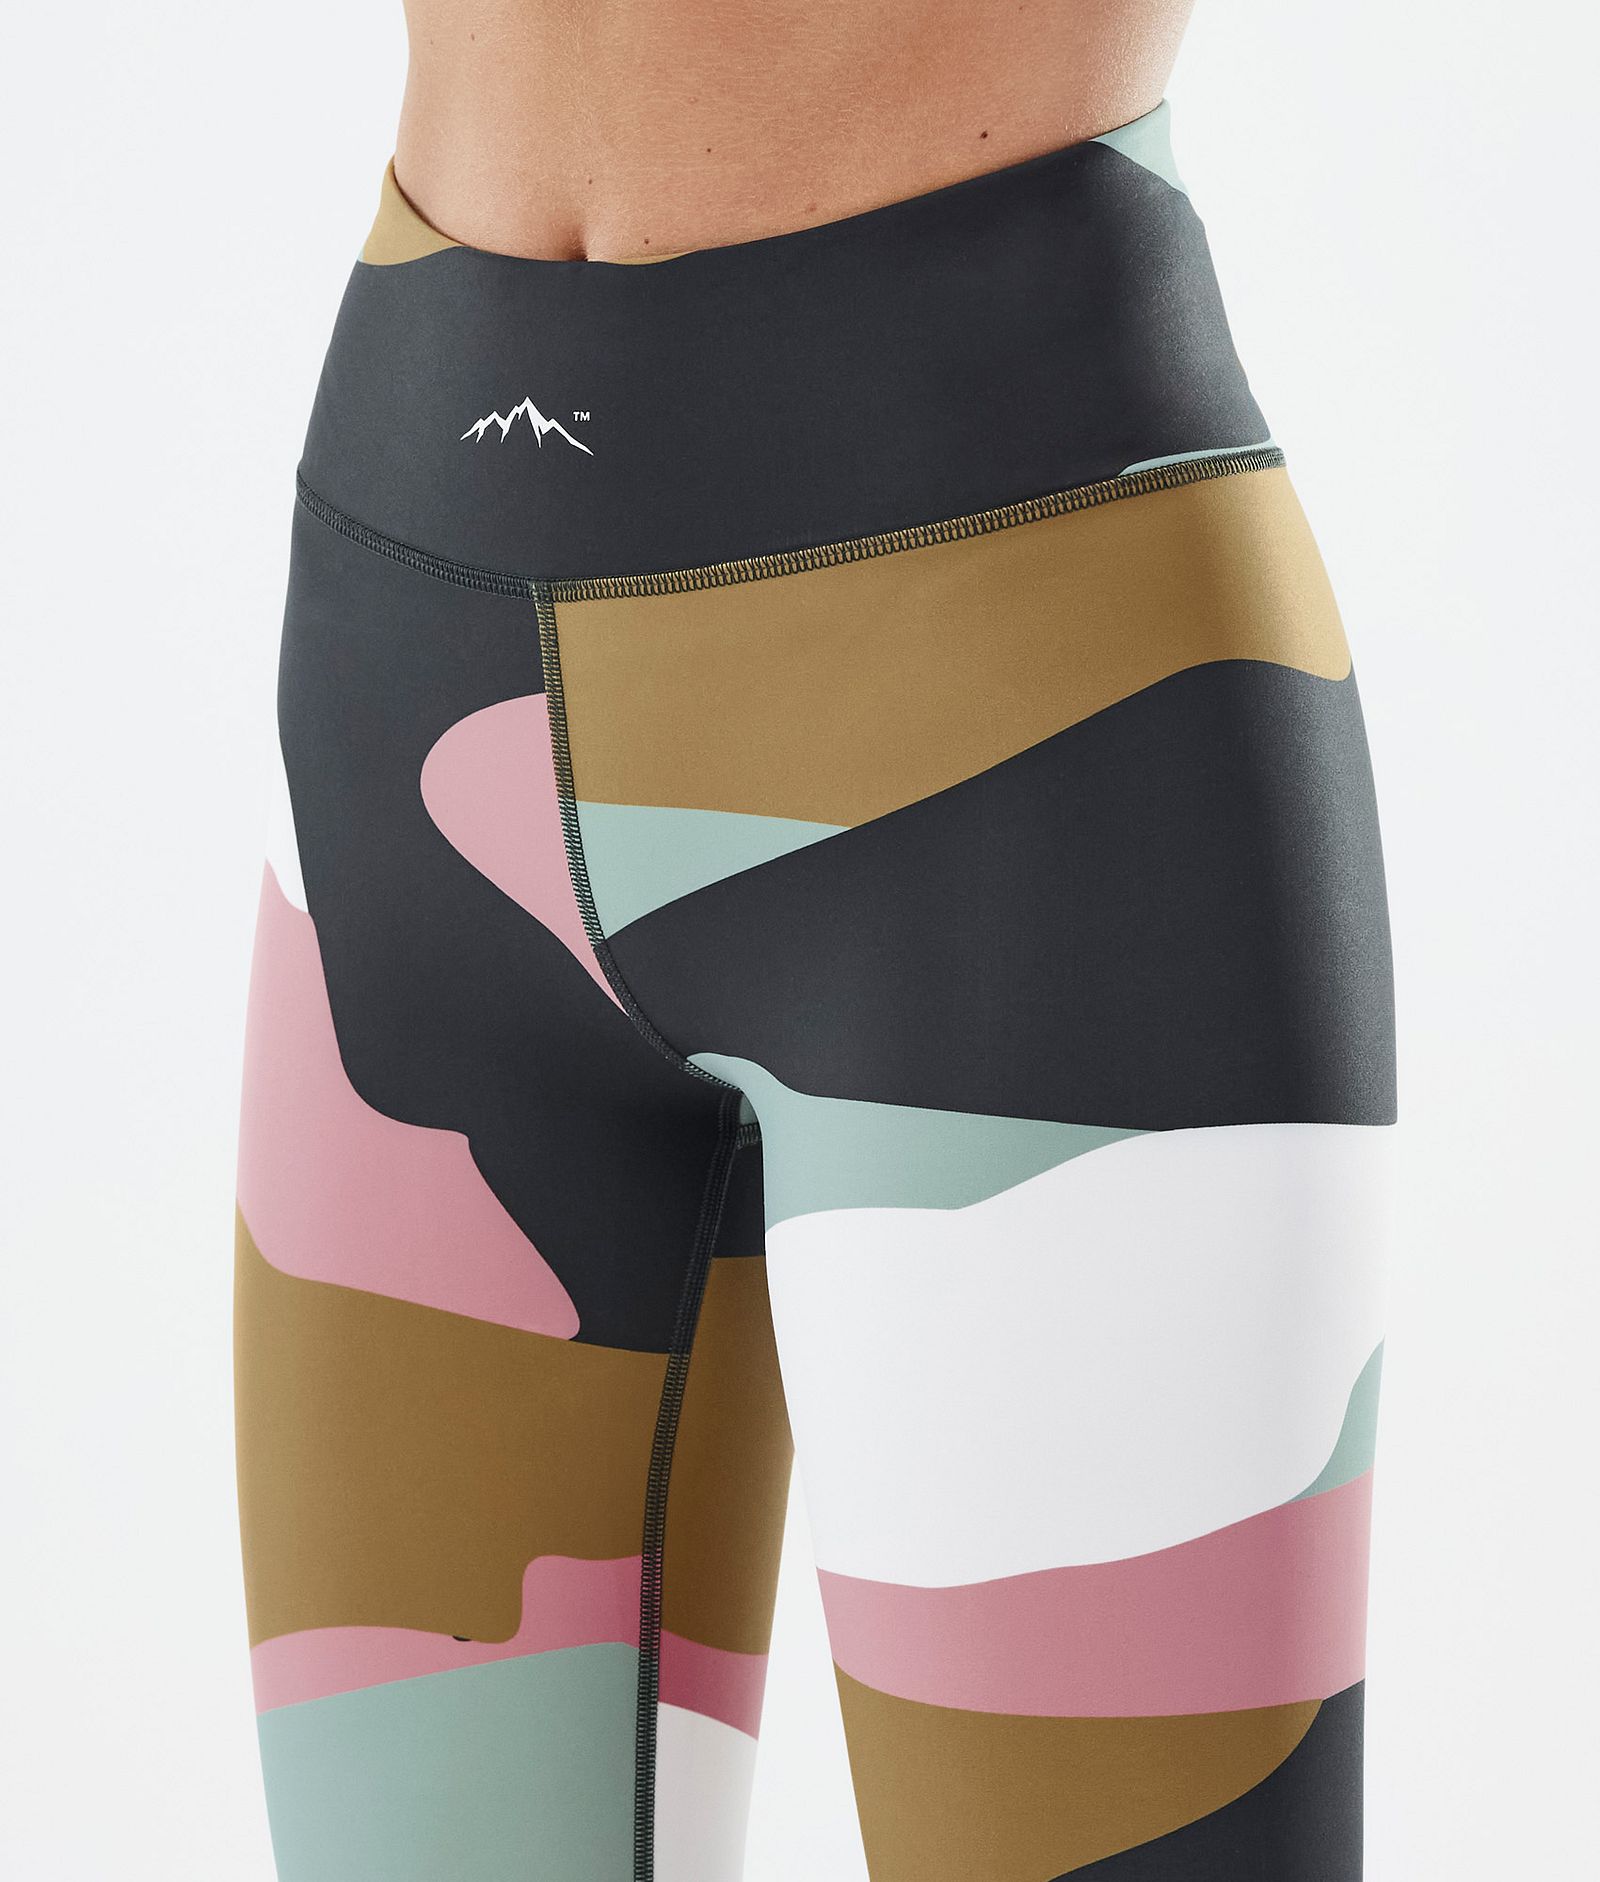 Dope Snuggle W Pantalón Térmico Mujer 2X-Up Shards Gold Muted Pink